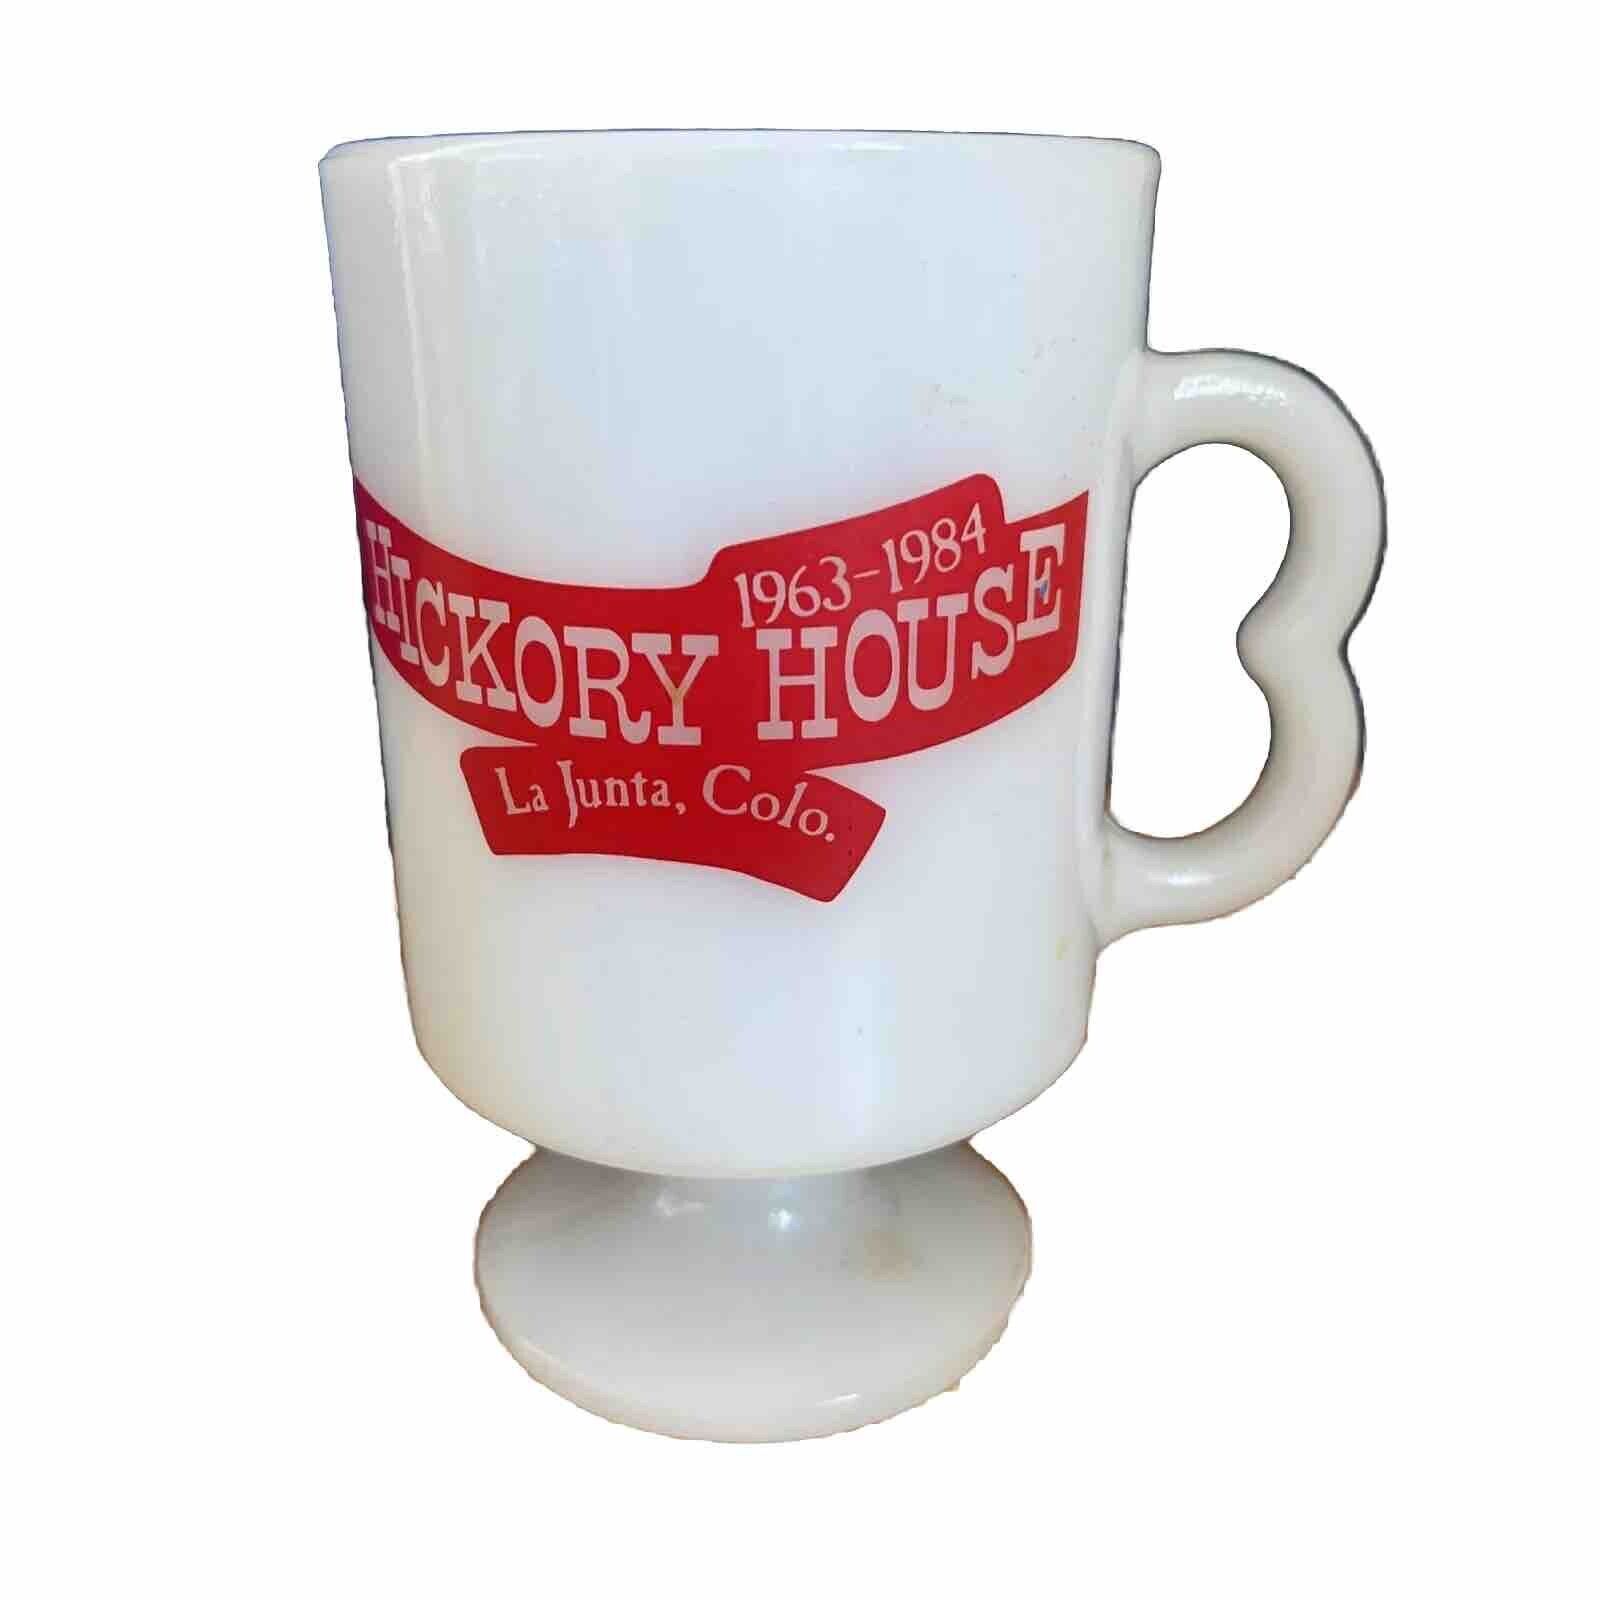 Vintage Hickory House 1963-1984 Fire King Cup White Red